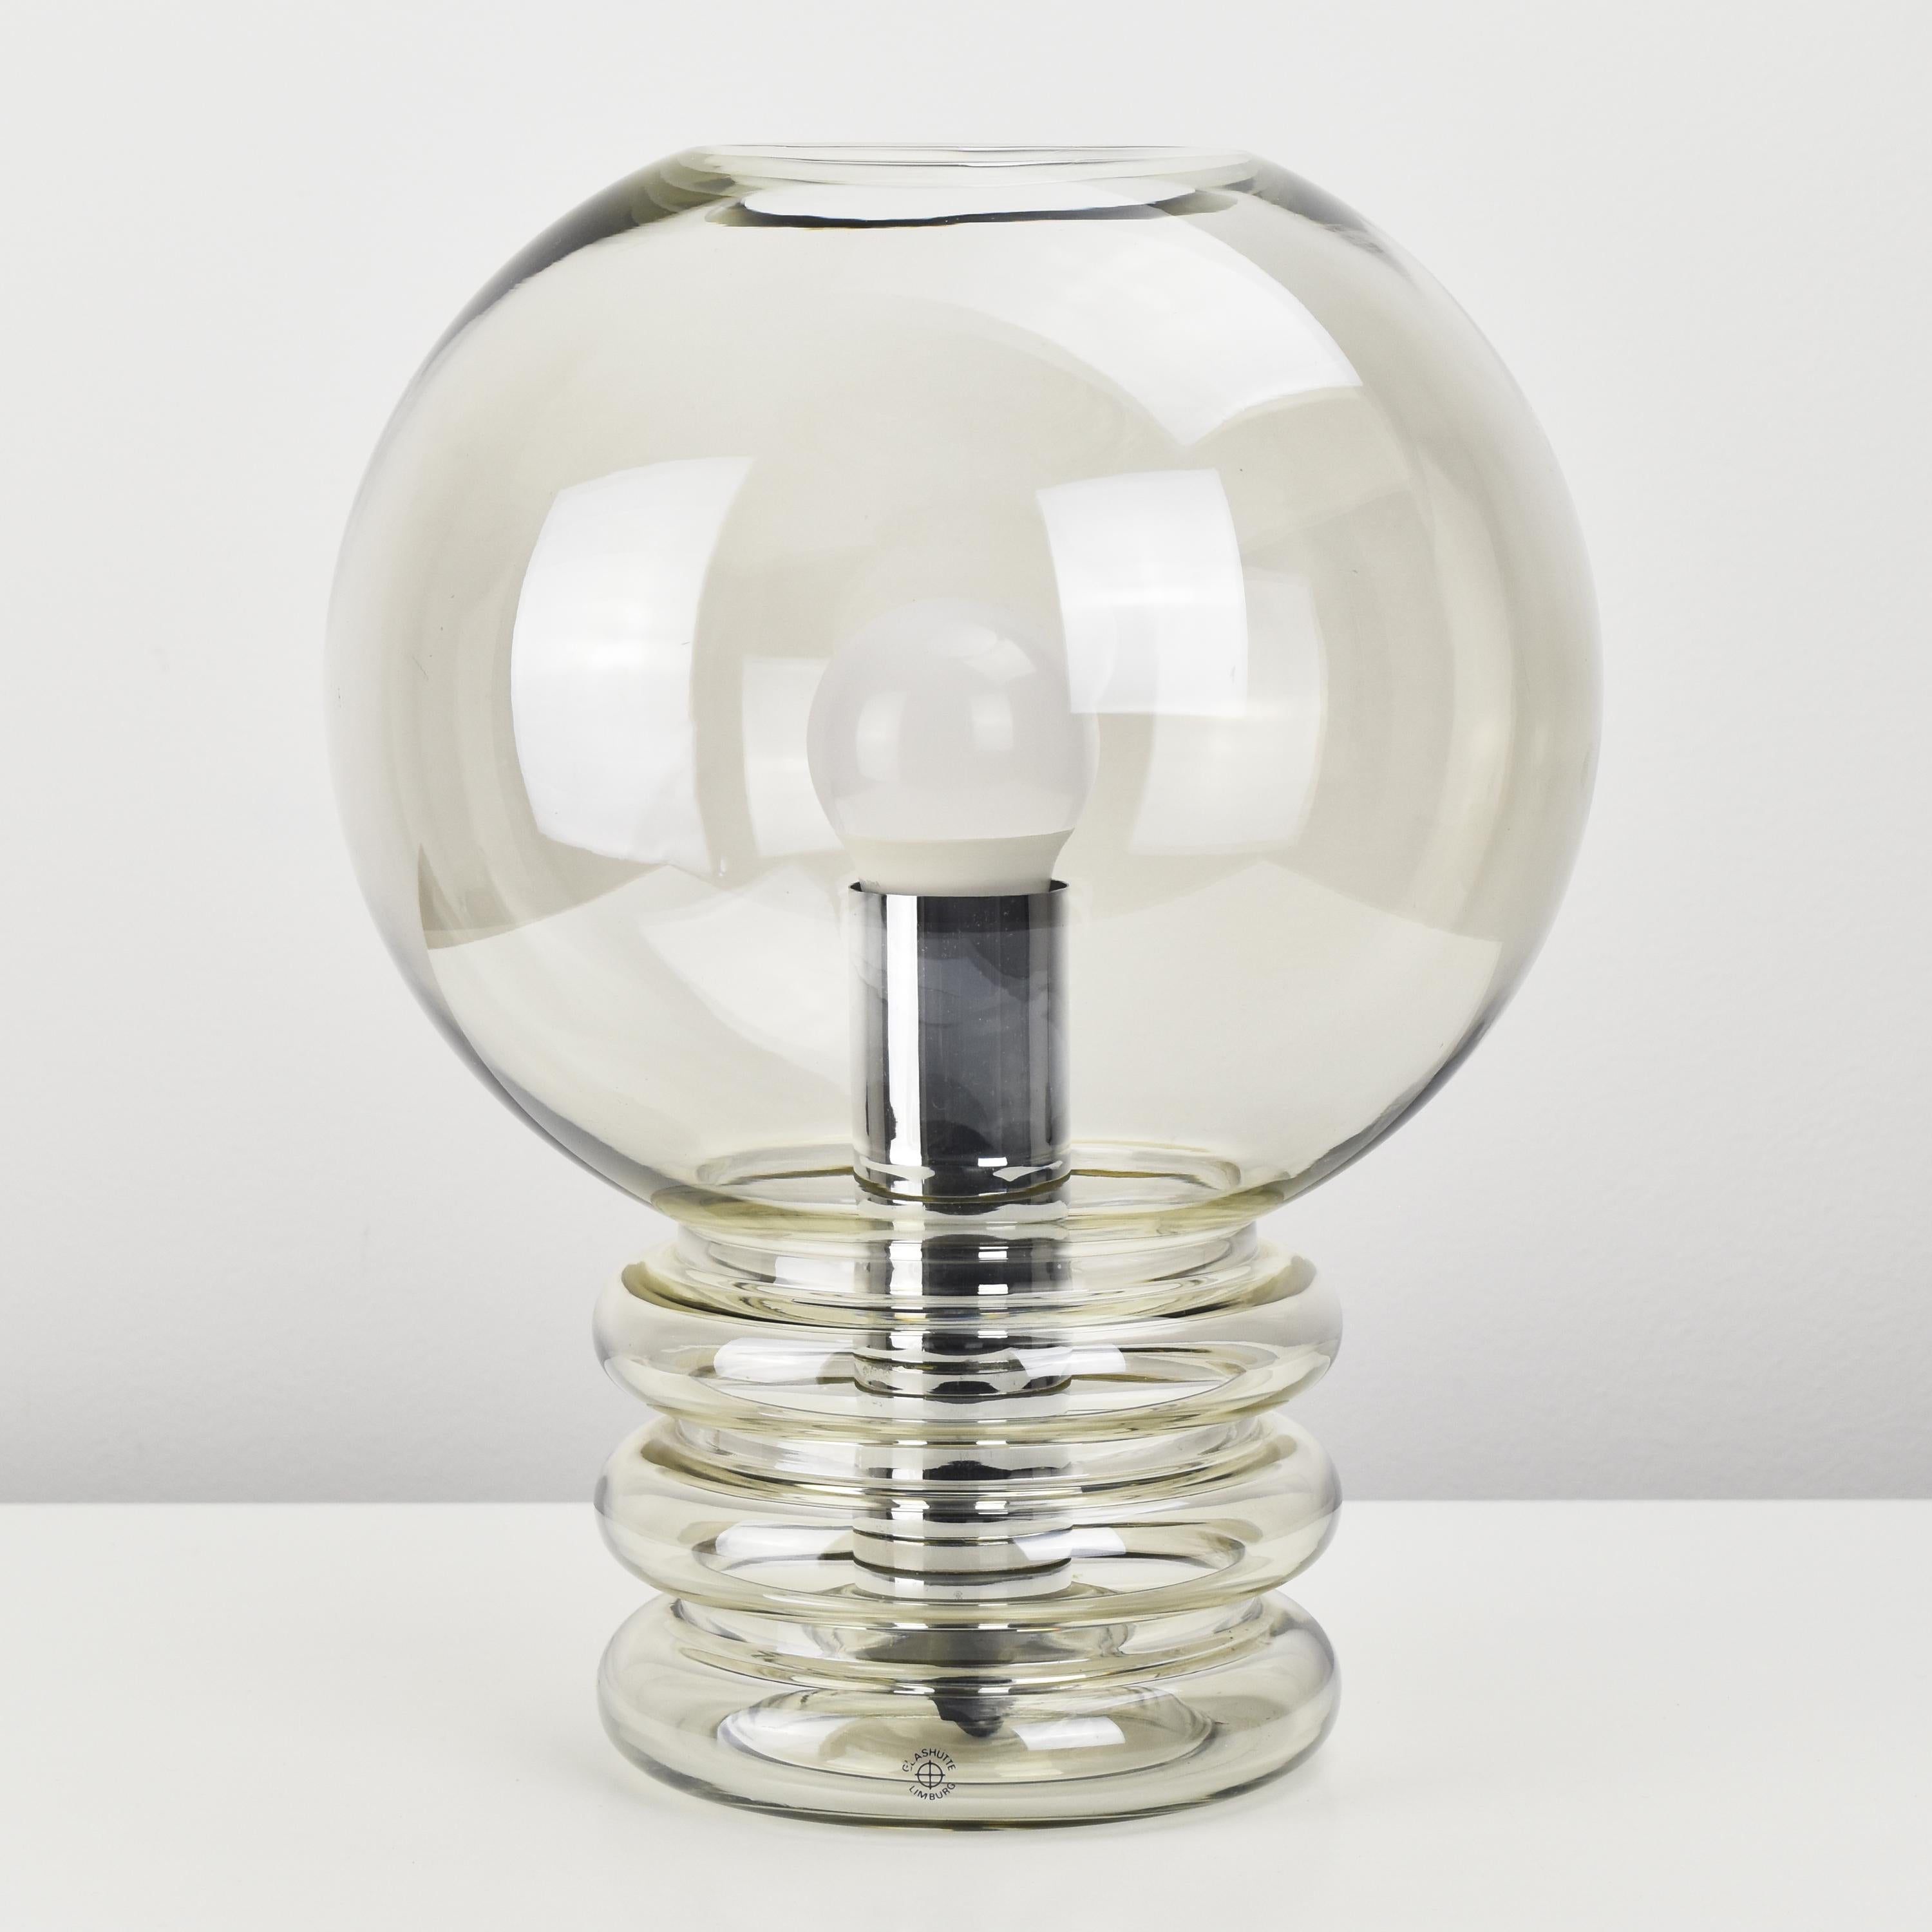 Glass Stylish Bulb Shaped Table Lamp by Glashutte Limburg, German, 1970s For Sale